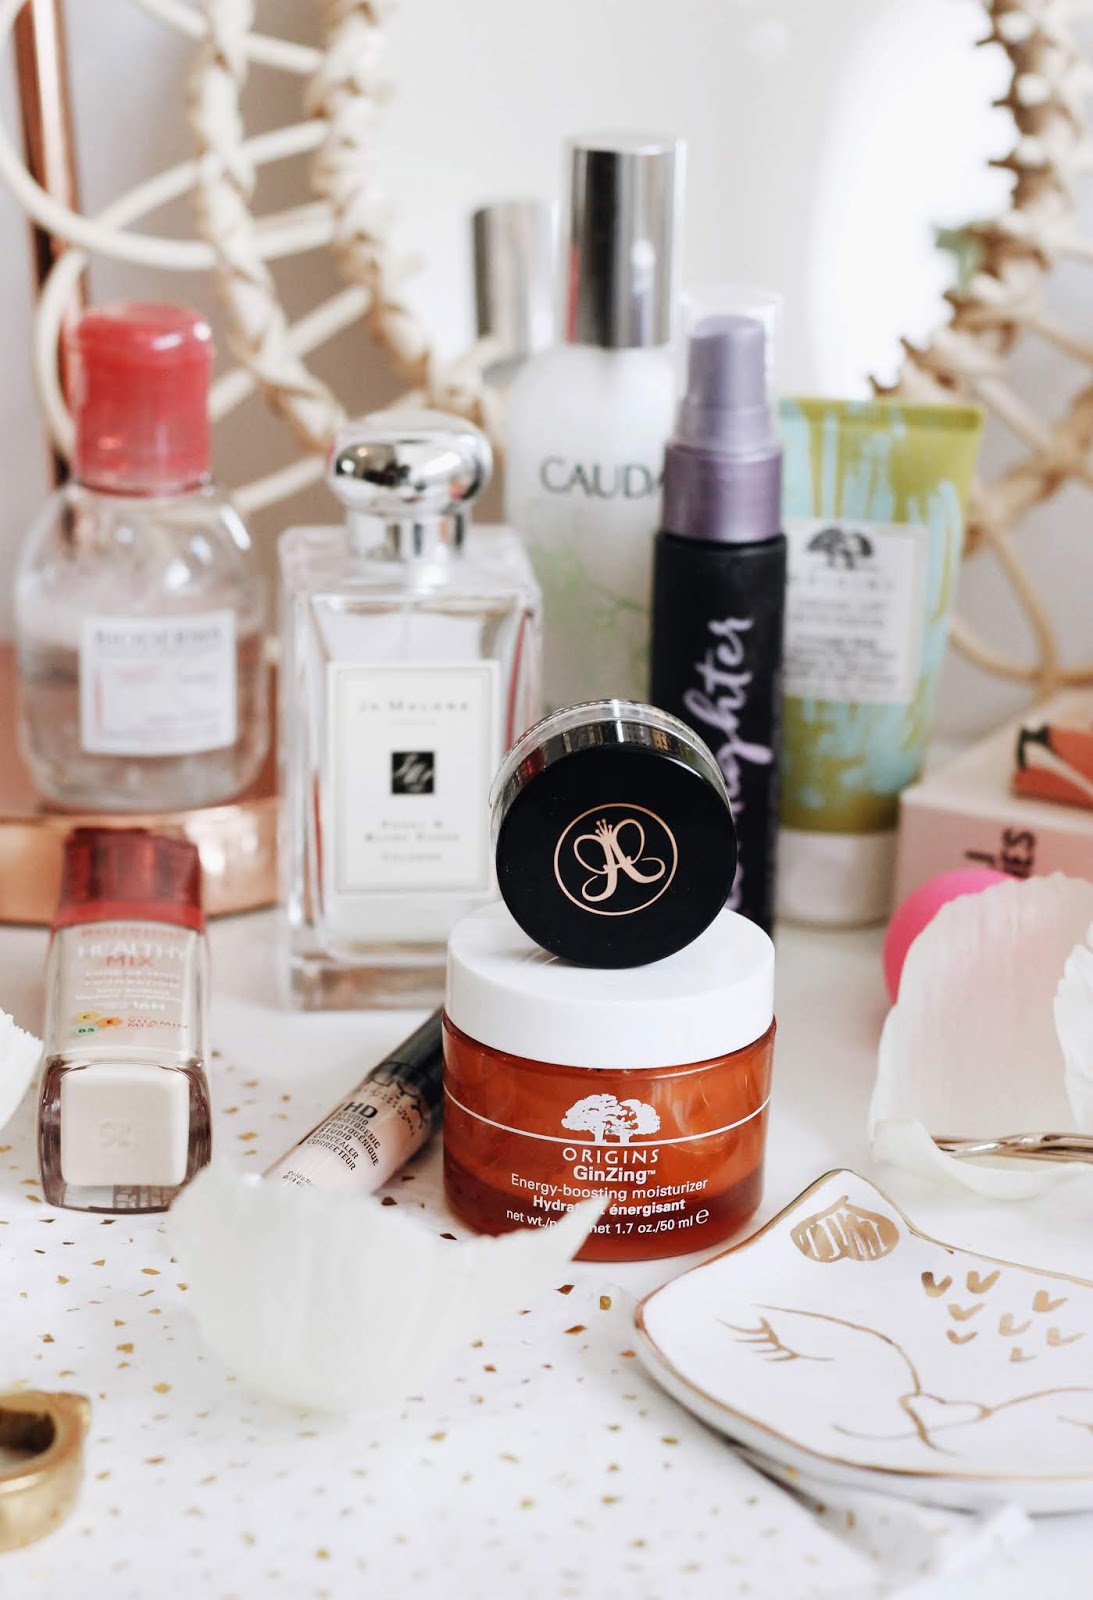 My Top Most - Repurchased Beauty Products